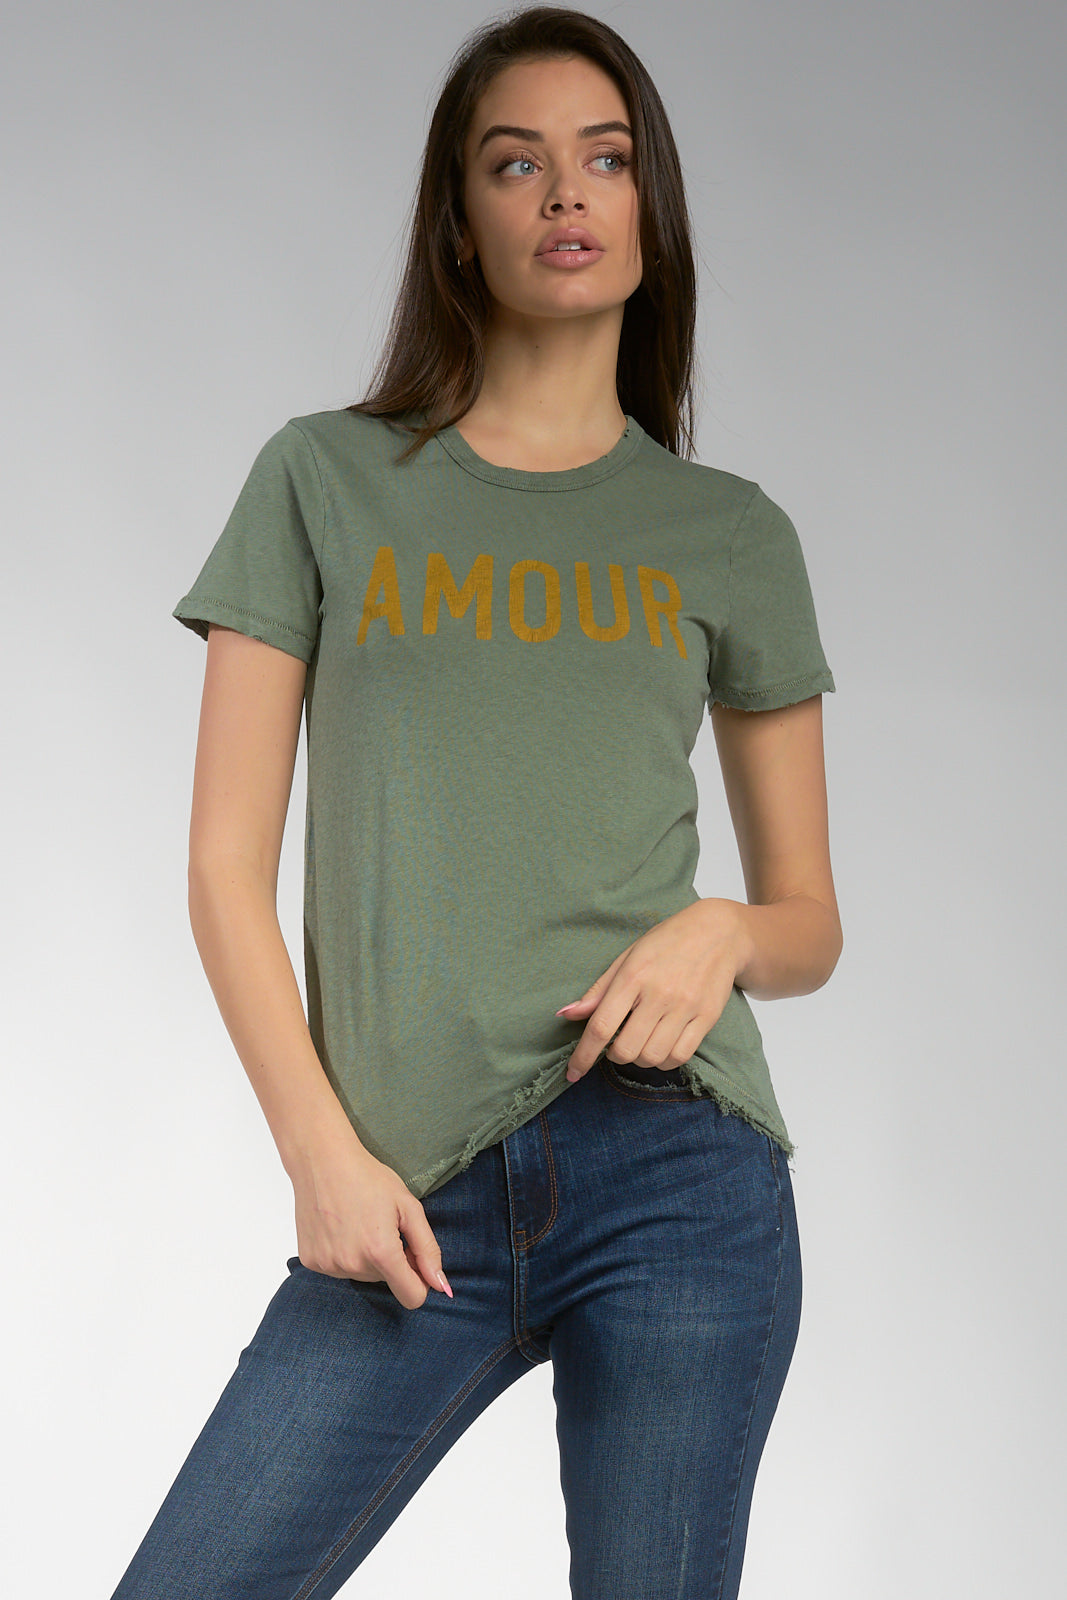 The Amour